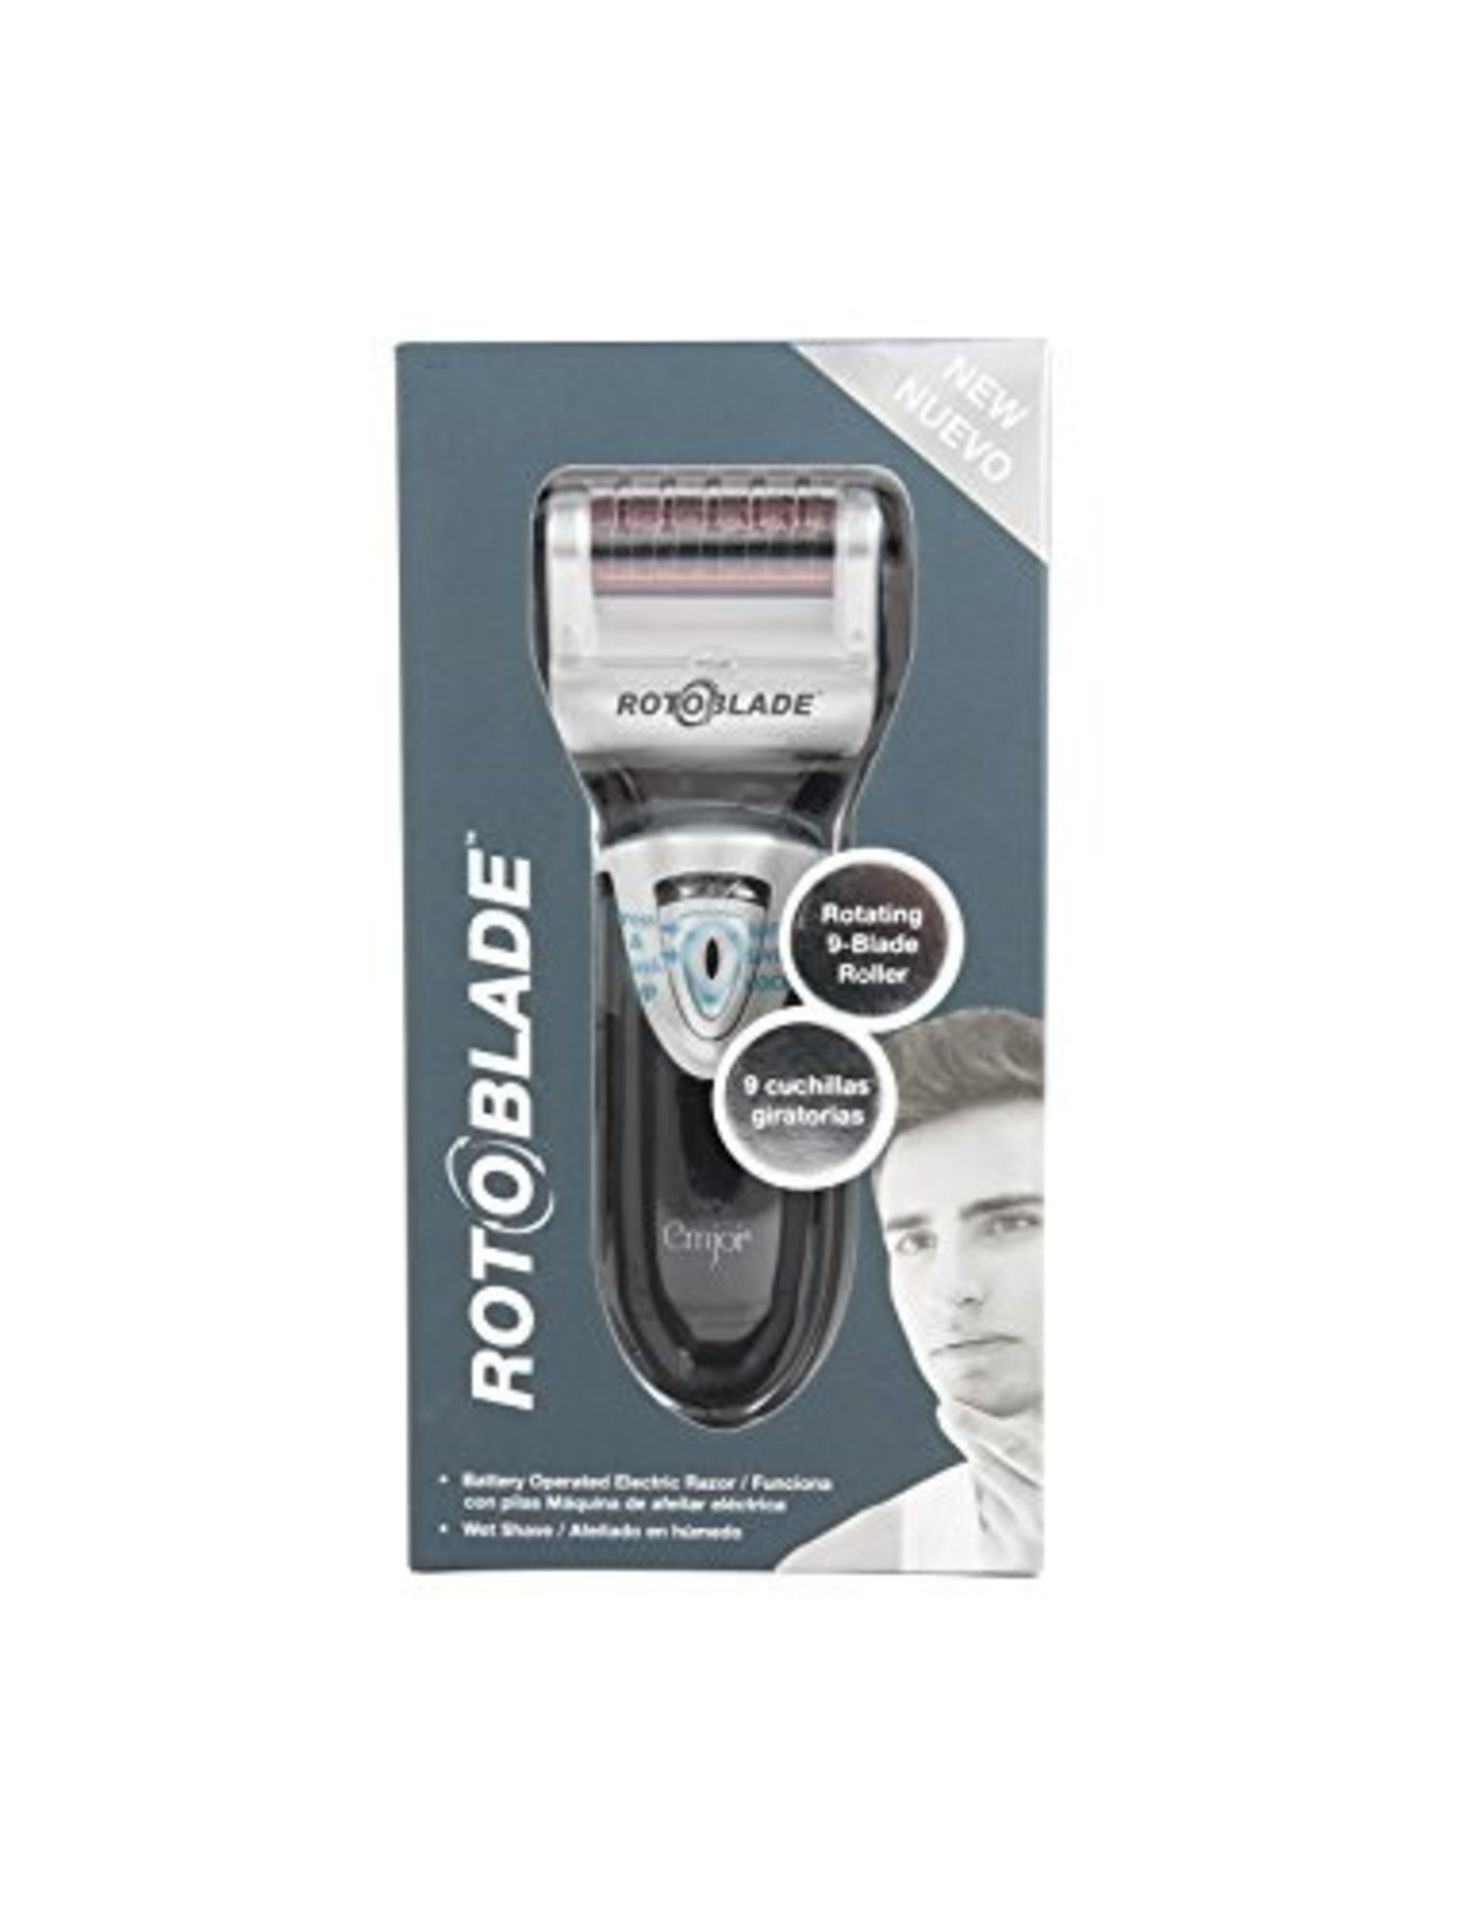 V *TRADE QTY* Brand New RotoBladed Waterproof Electric Razor 9 Rotating Blades at 30RPM CLoser Safer - Image 2 of 2